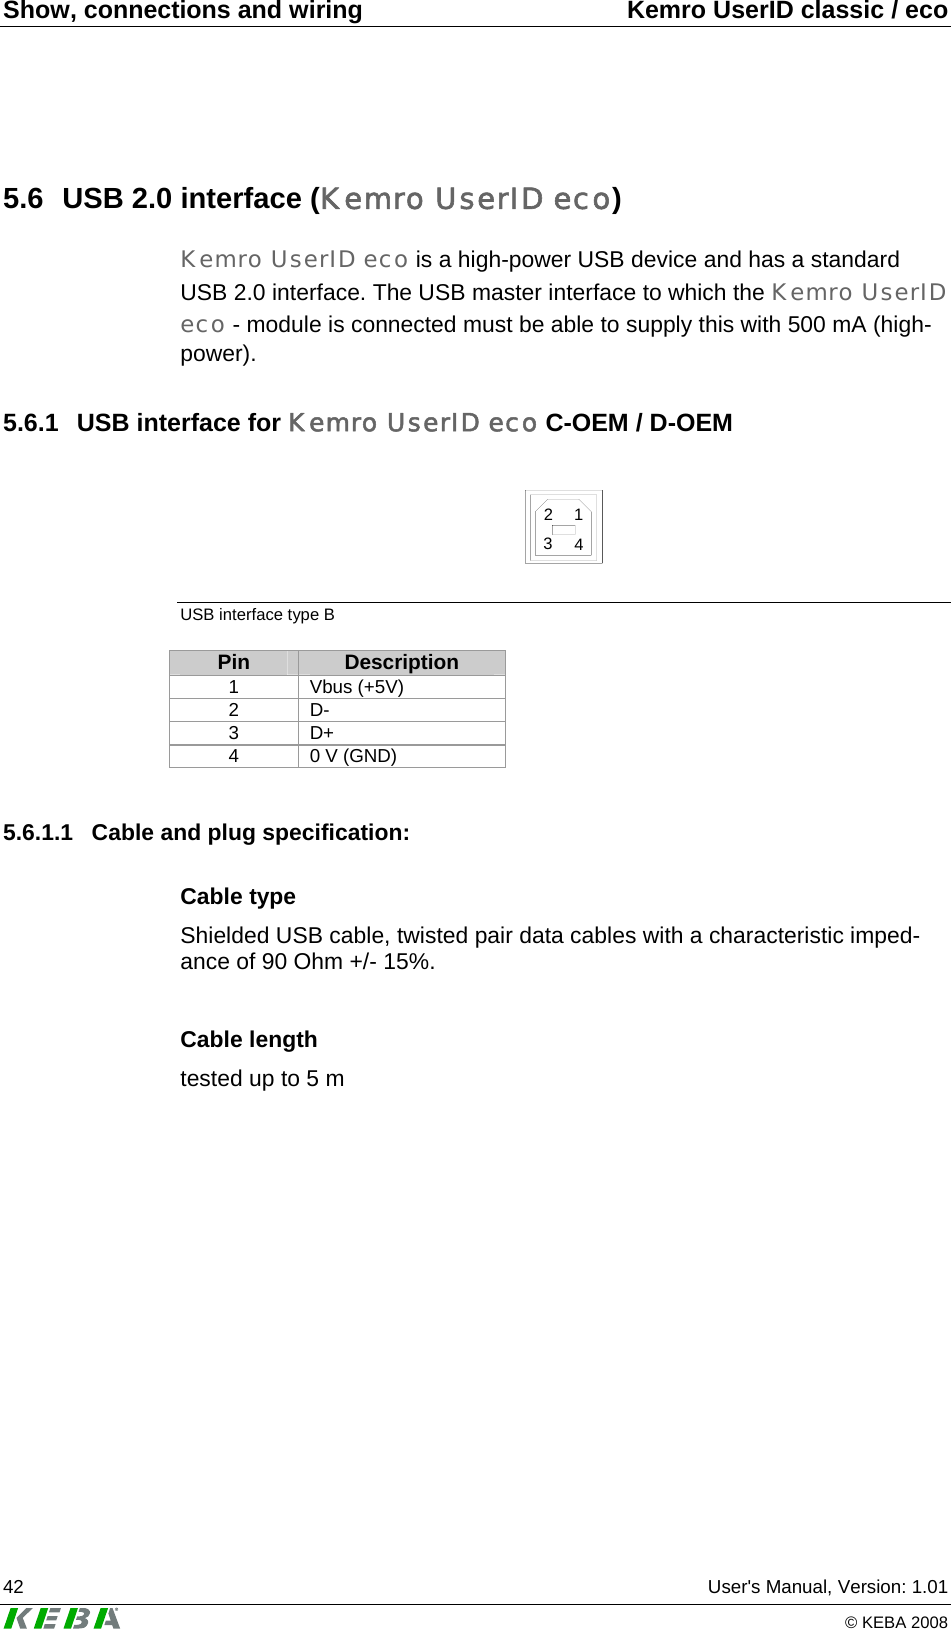 Show, connections and wiring  Kemro UserID classic / eco 42  User&apos;s Manual, Version: 1.01   © KEBA 2008 5.6  USB 2.0 interface (Kemro UserID eco) Kemro UserID eco is a high-power USB device and has a standard USB 2.0 interface. The USB master interface to which the Kemro UserID eco - module is connected must be able to supply this with 500 mA (high-power). 5.6.1  USB interface for Kemro UserID eco C-OEM / D-OEM  2134 USB interface type B Pin  Description 1 Vbus (+5V) 2 D- 3 D+ 4  0 V (GND)  5.6.1.1  Cable and plug specification: Cable type Shielded USB cable, twisted pair data cables with a characteristic imped-ance of 90 Ohm +/- 15%.  Cable length tested up to 5 m  